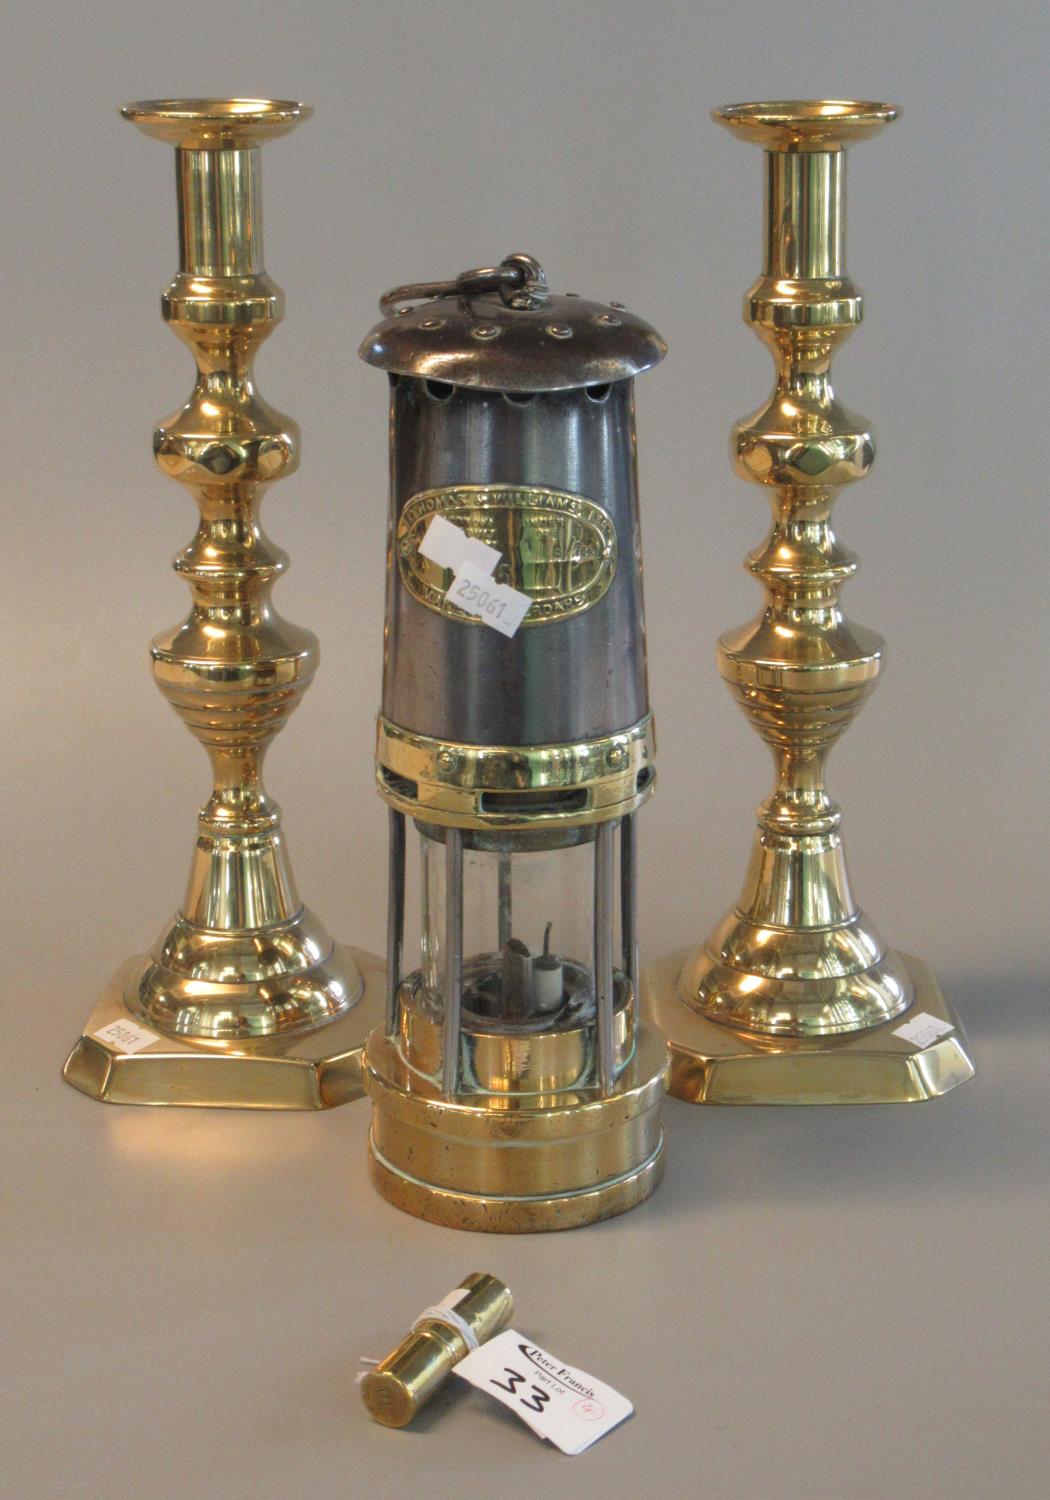 Pair of brass baluster candlesticks, 32 cm high approx. Together with a small cylindrical brass